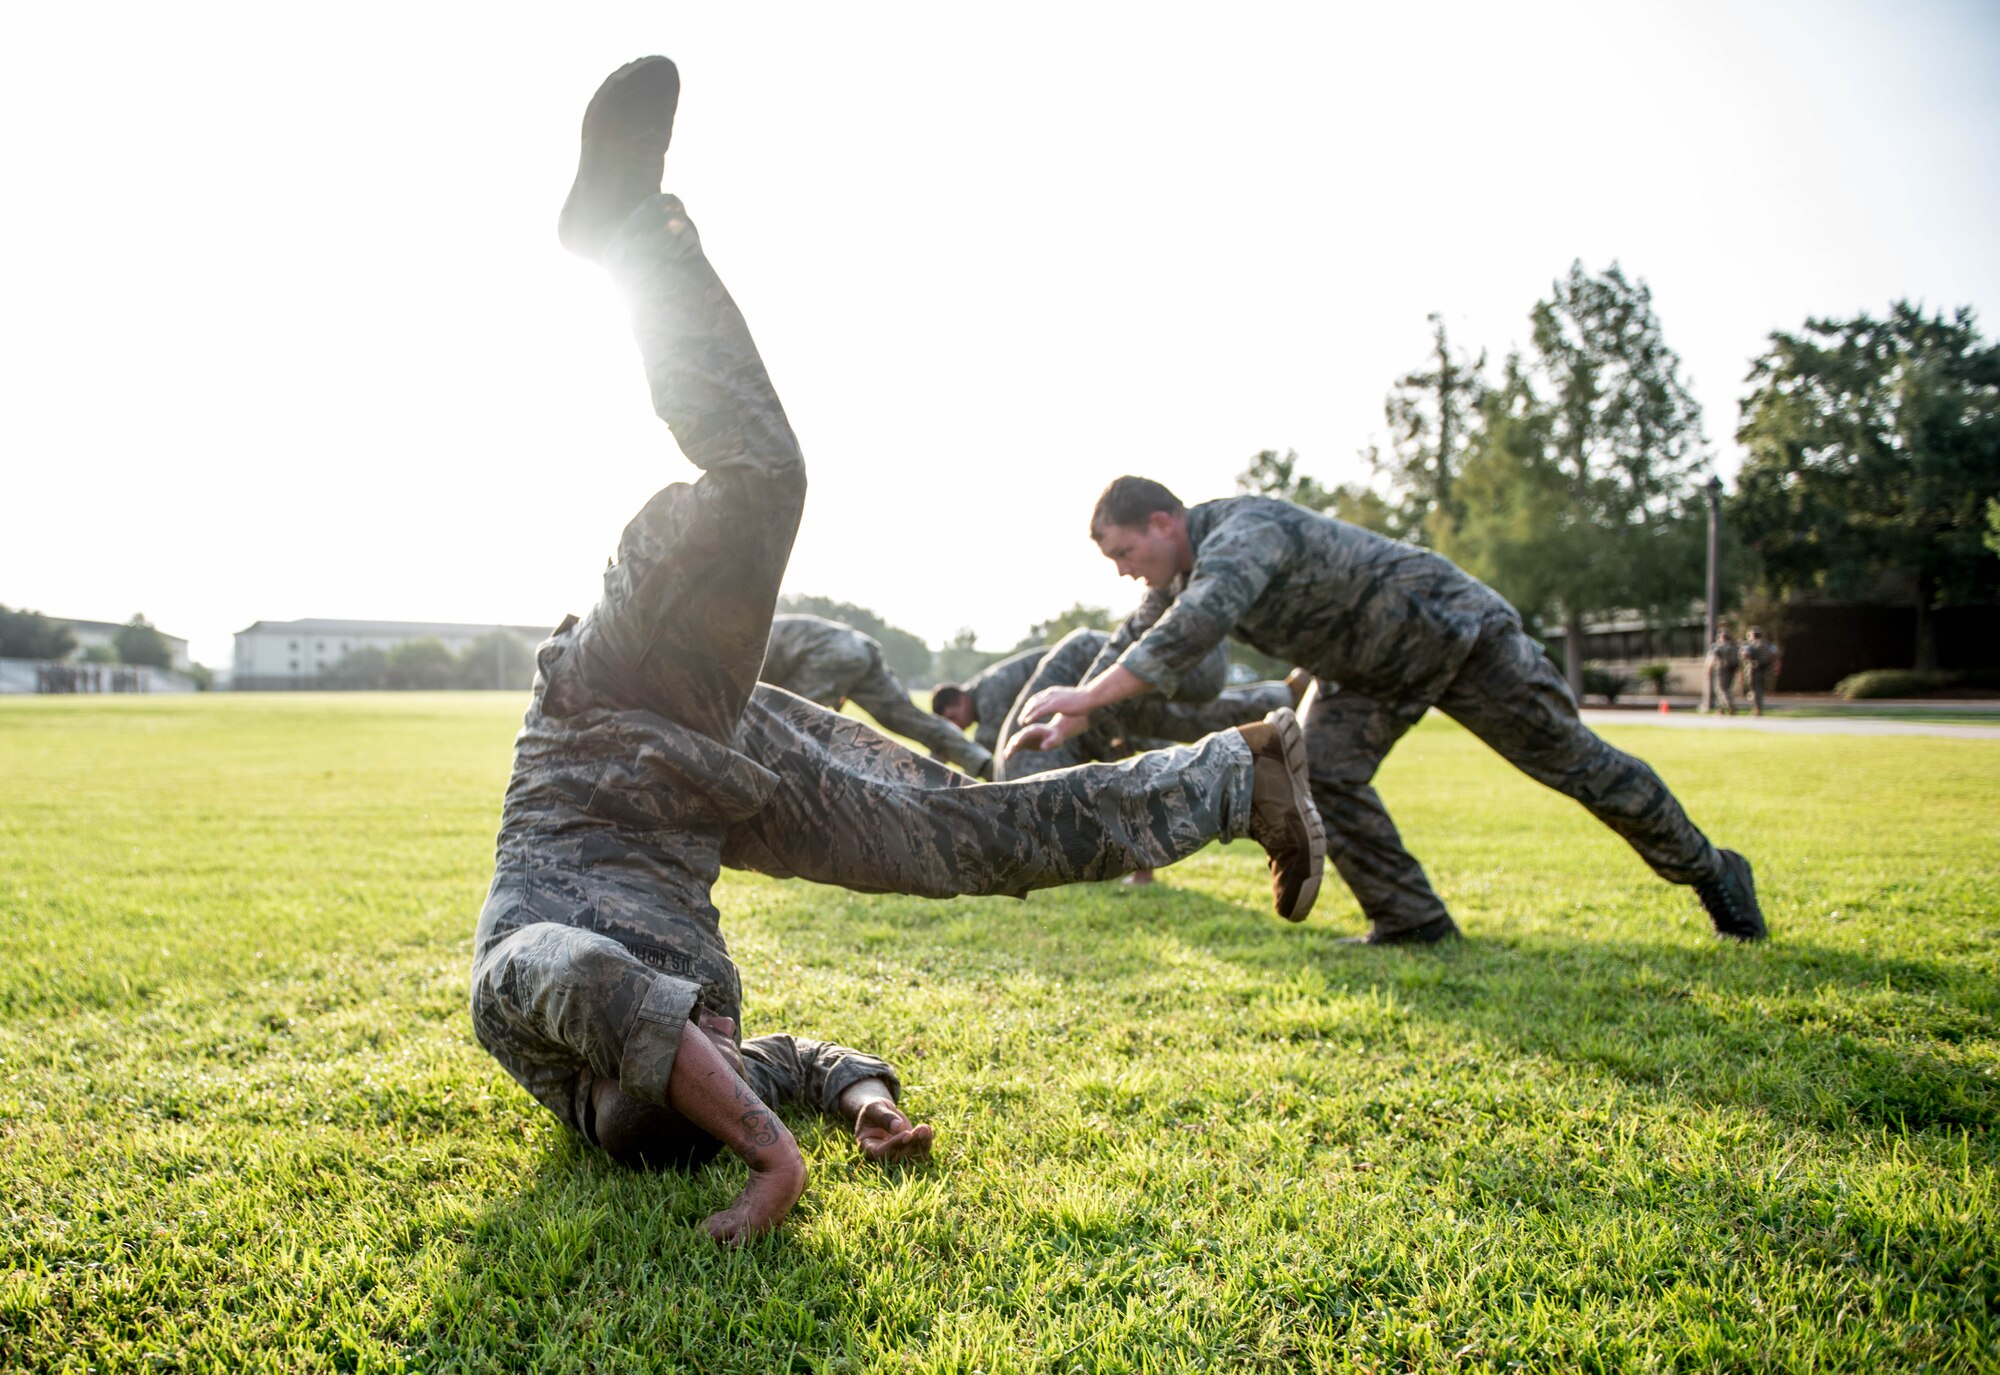 Airmen from the 352nd Special Warfare Training Squadron participate in a memorial physical training session on Keesler Air Force Base, Mississippi, Aug. 9, 2019. The PT event was in memory of U.S. Air Force Staff Sgt. Andrew Harvell, combat controller, killed in action on Aug. 6, 2011. Special Warfare trainees also attend courses in the 334th and 335th Training Squadrons before attending additional training at Pope Air Force Base, North Carolina. (U.S. Air Force photo by Sarah Loicano)